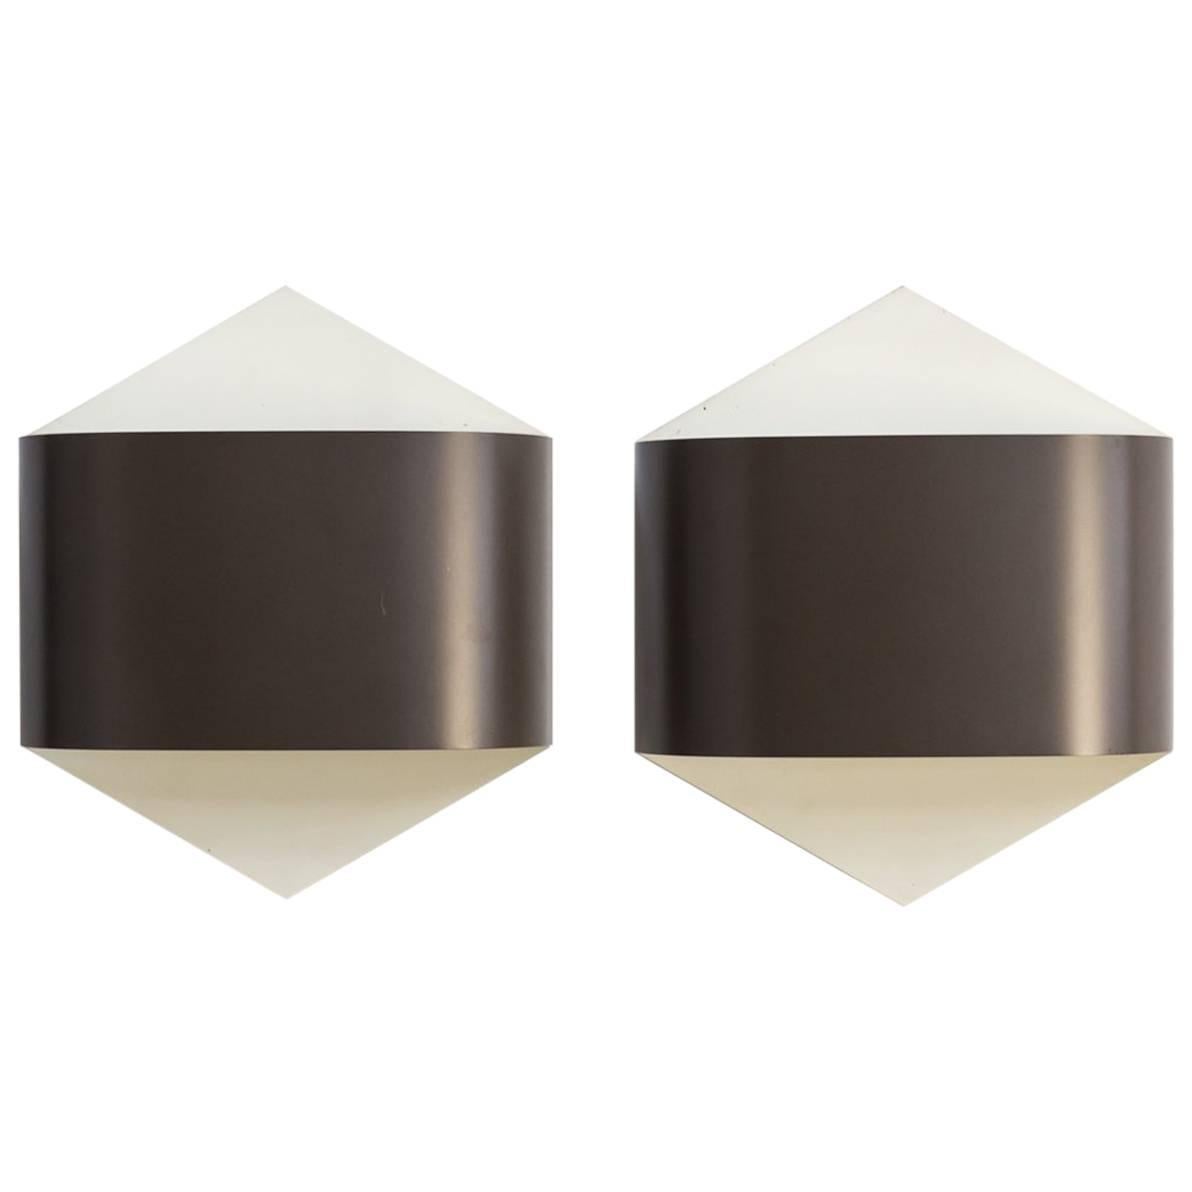 1960s Rolf Krüger & Dieter Witte Wall Sconces by Staff Germany, Set of Two For Sale